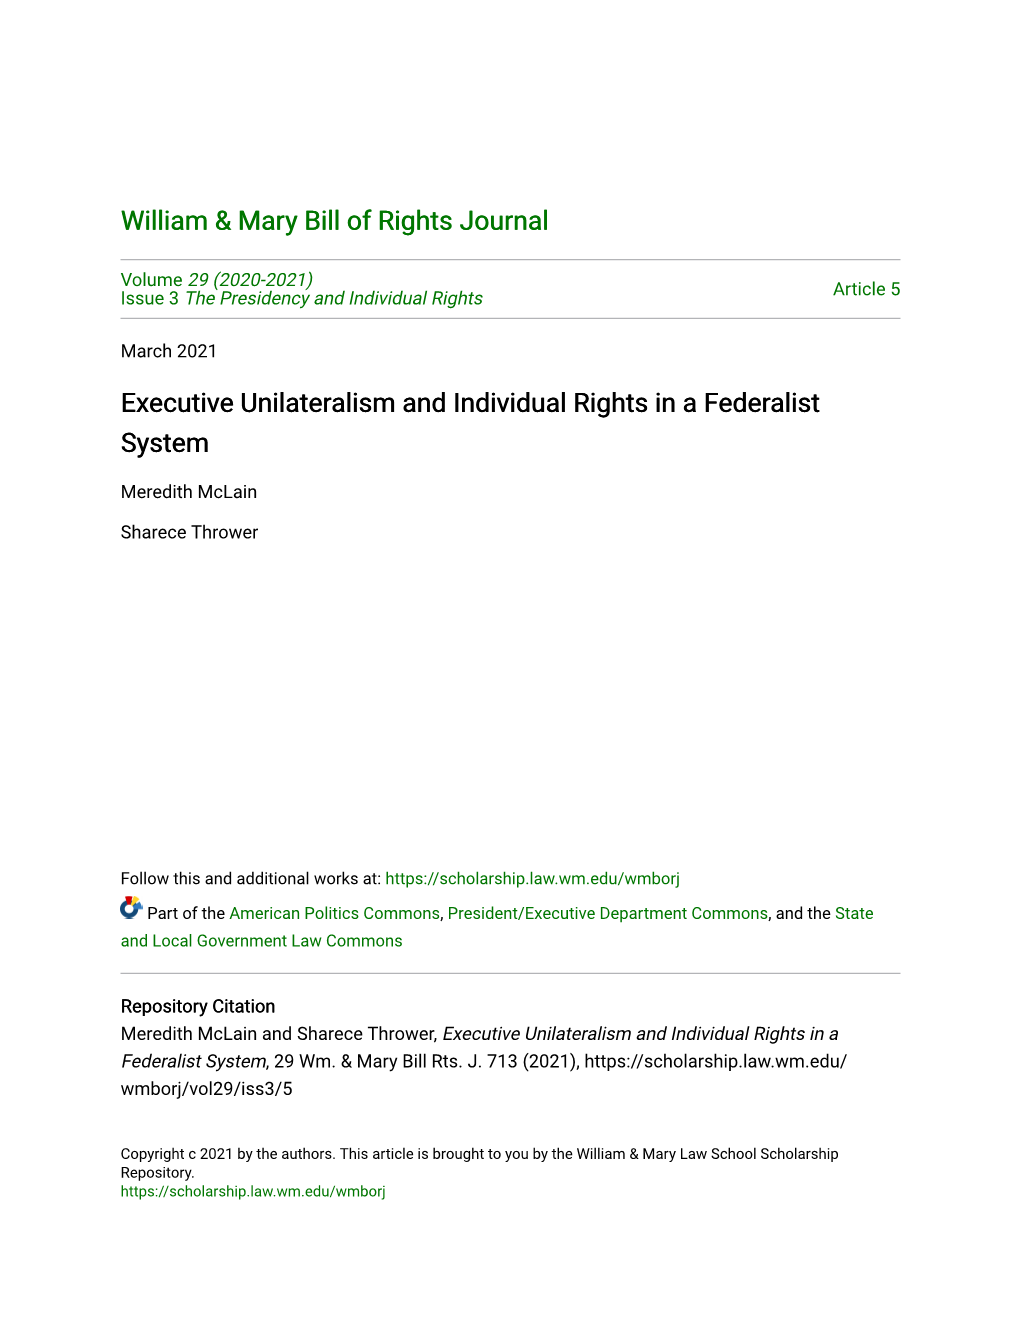 Executive Unilateralism and Individual Rights in a Federalist System